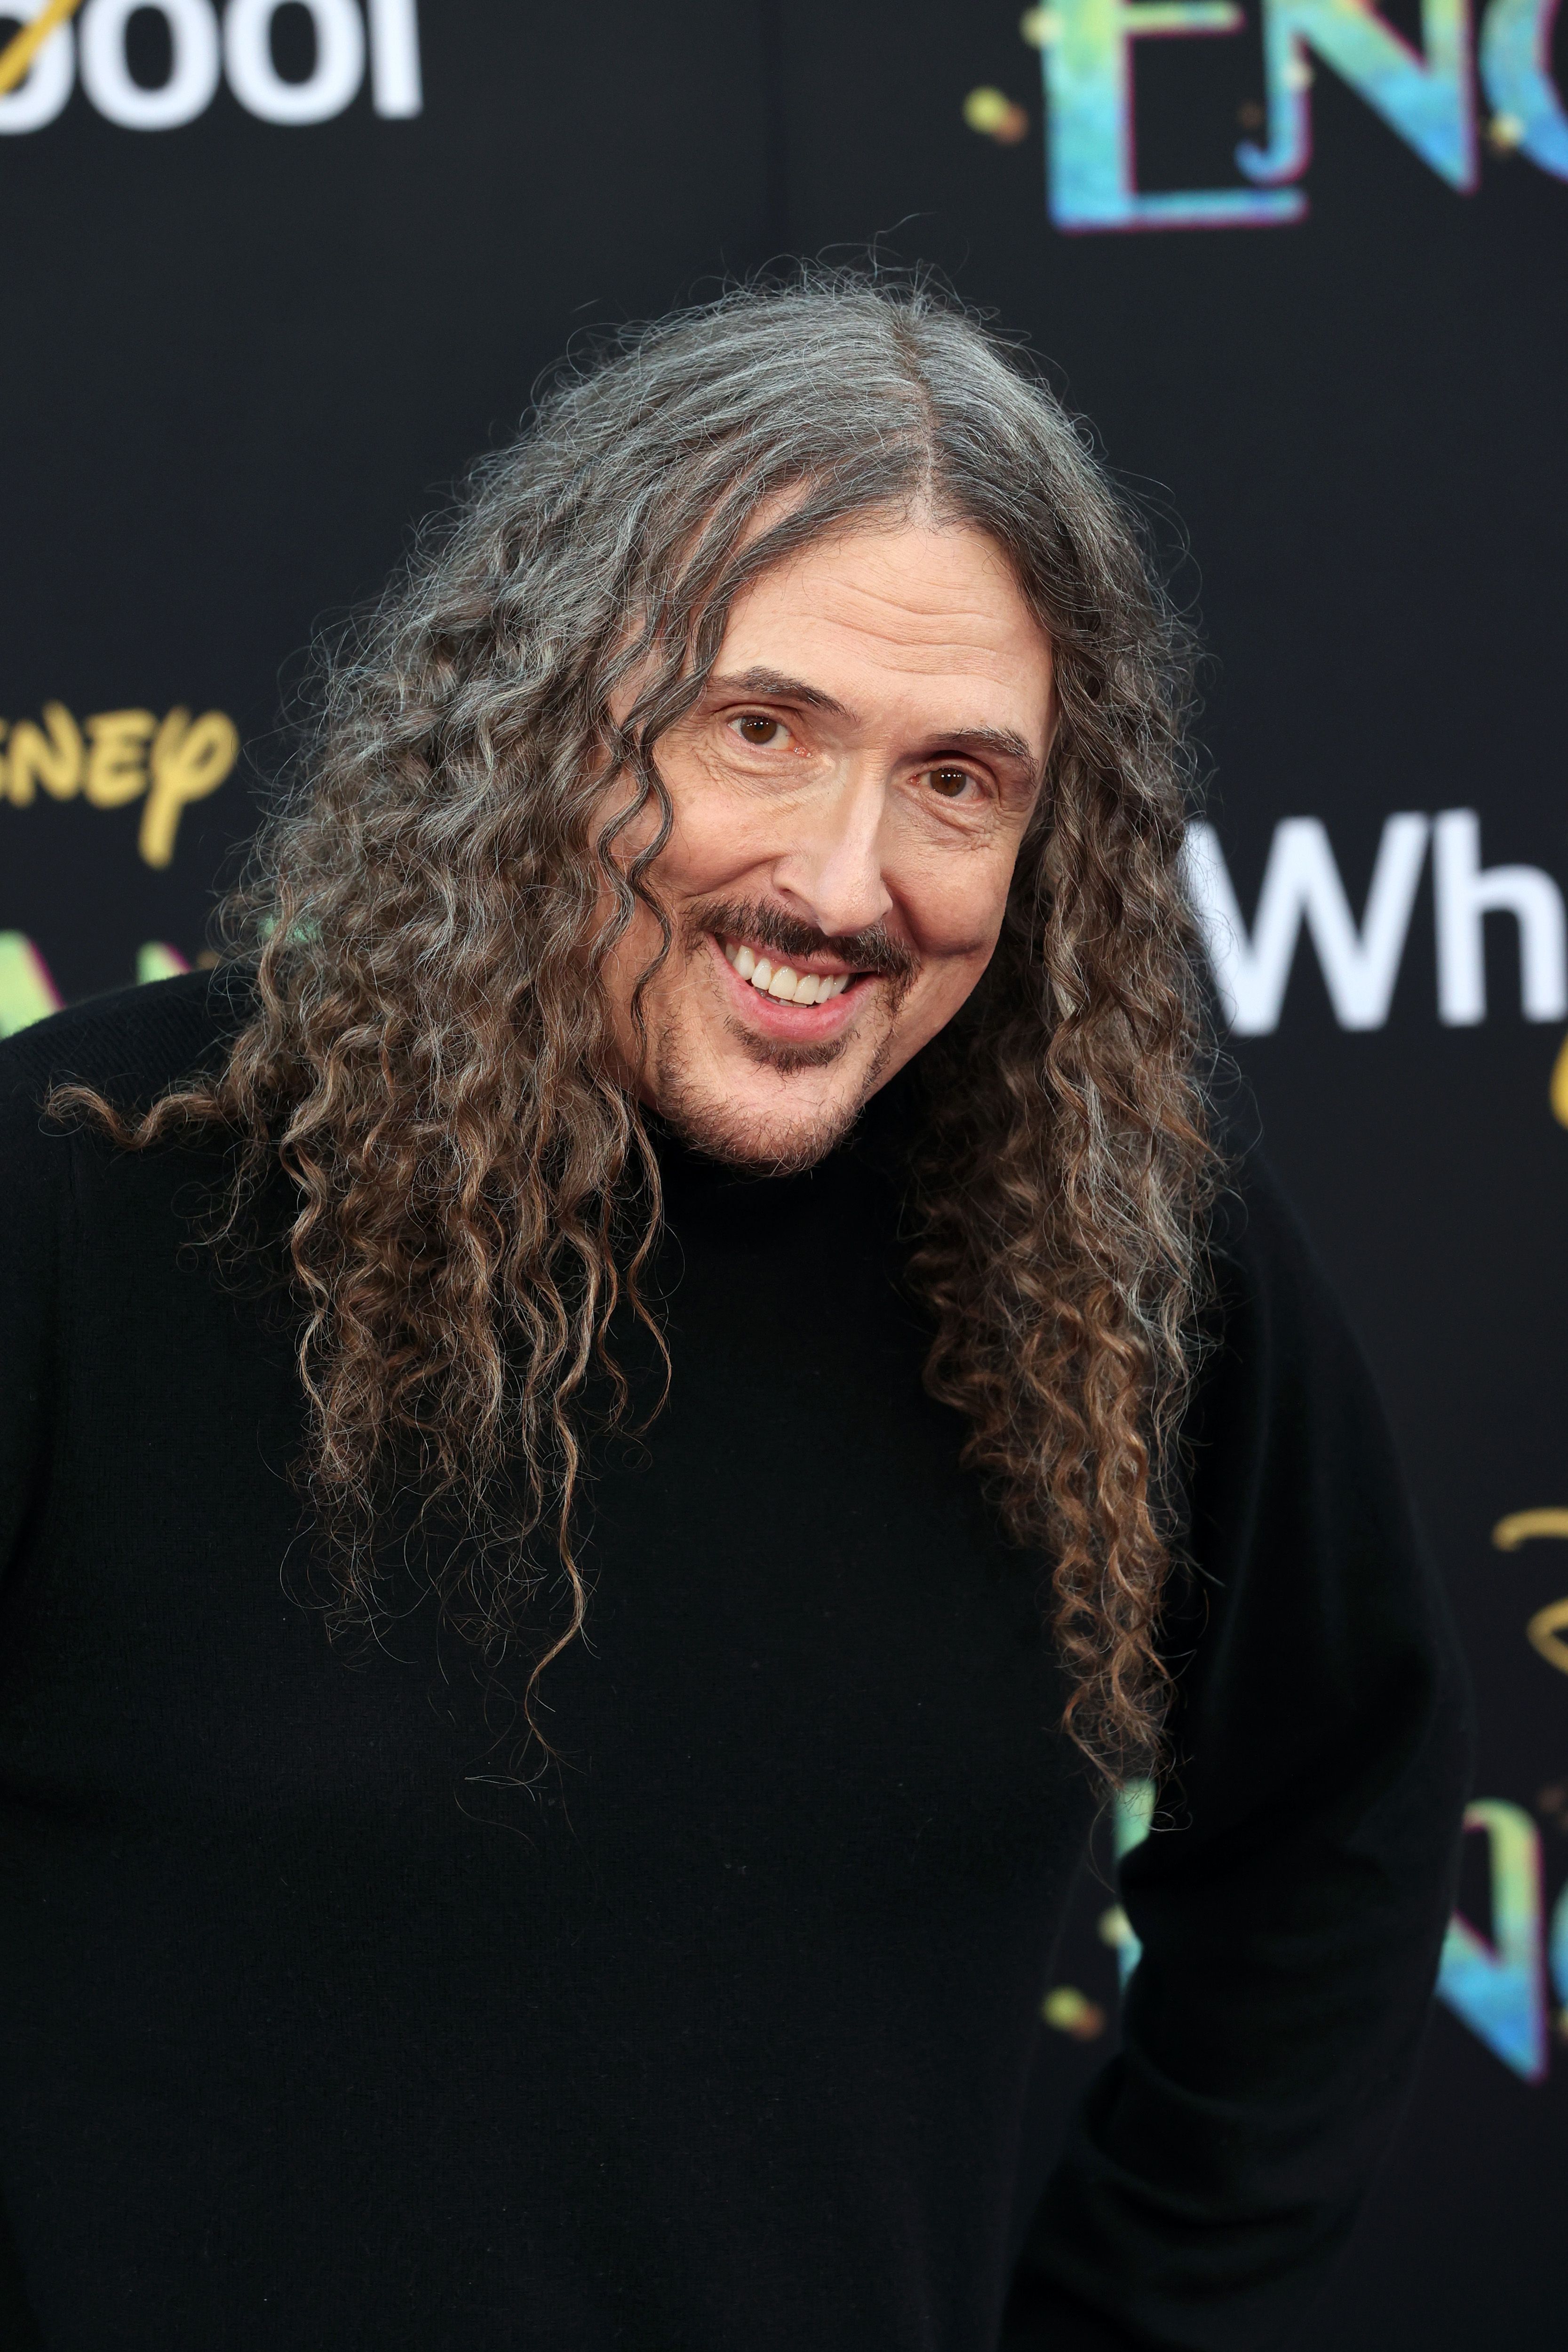 "Weird Al" Yankovic at El Capitan Theatre on November 3, 2021, in Los Angeles, California. | Source: Getty Images